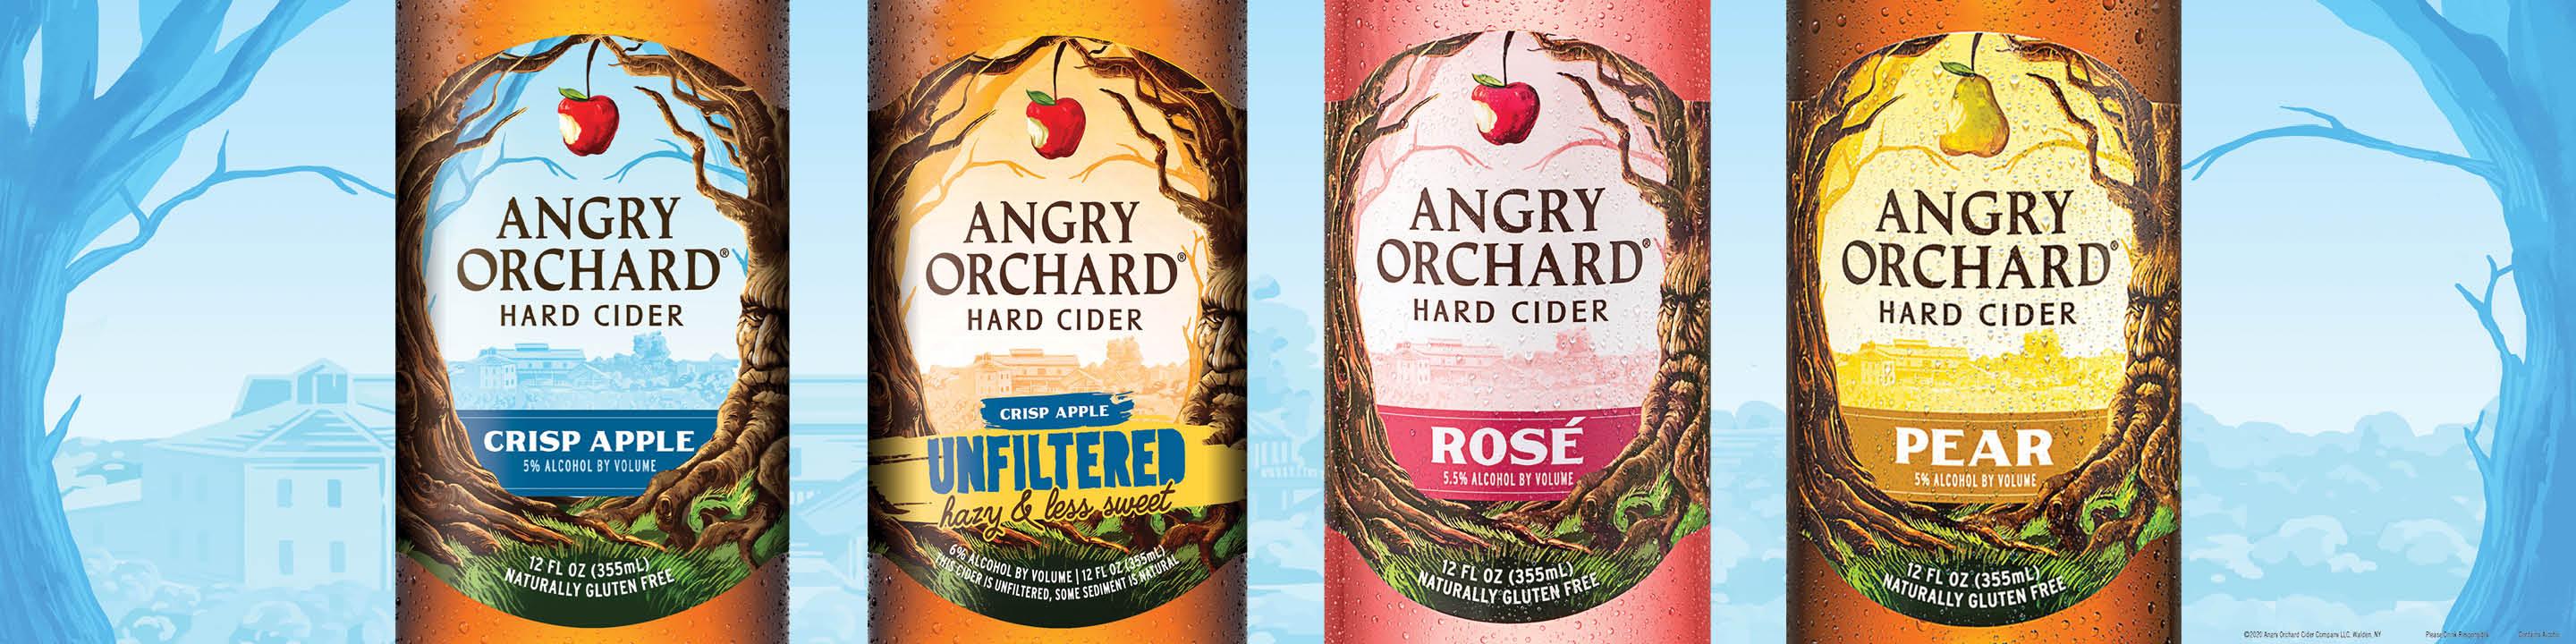 Angry Orchard Hard Ciders are crafted in the heart of the Hudson Valley.  We are committed to bringing traditional cider varieties and lost heirloom varieties back to the United States. As such, certain areas of the orchard are designated for new cider apple plantings and varietal research, in collaboration with local institutions and growers.